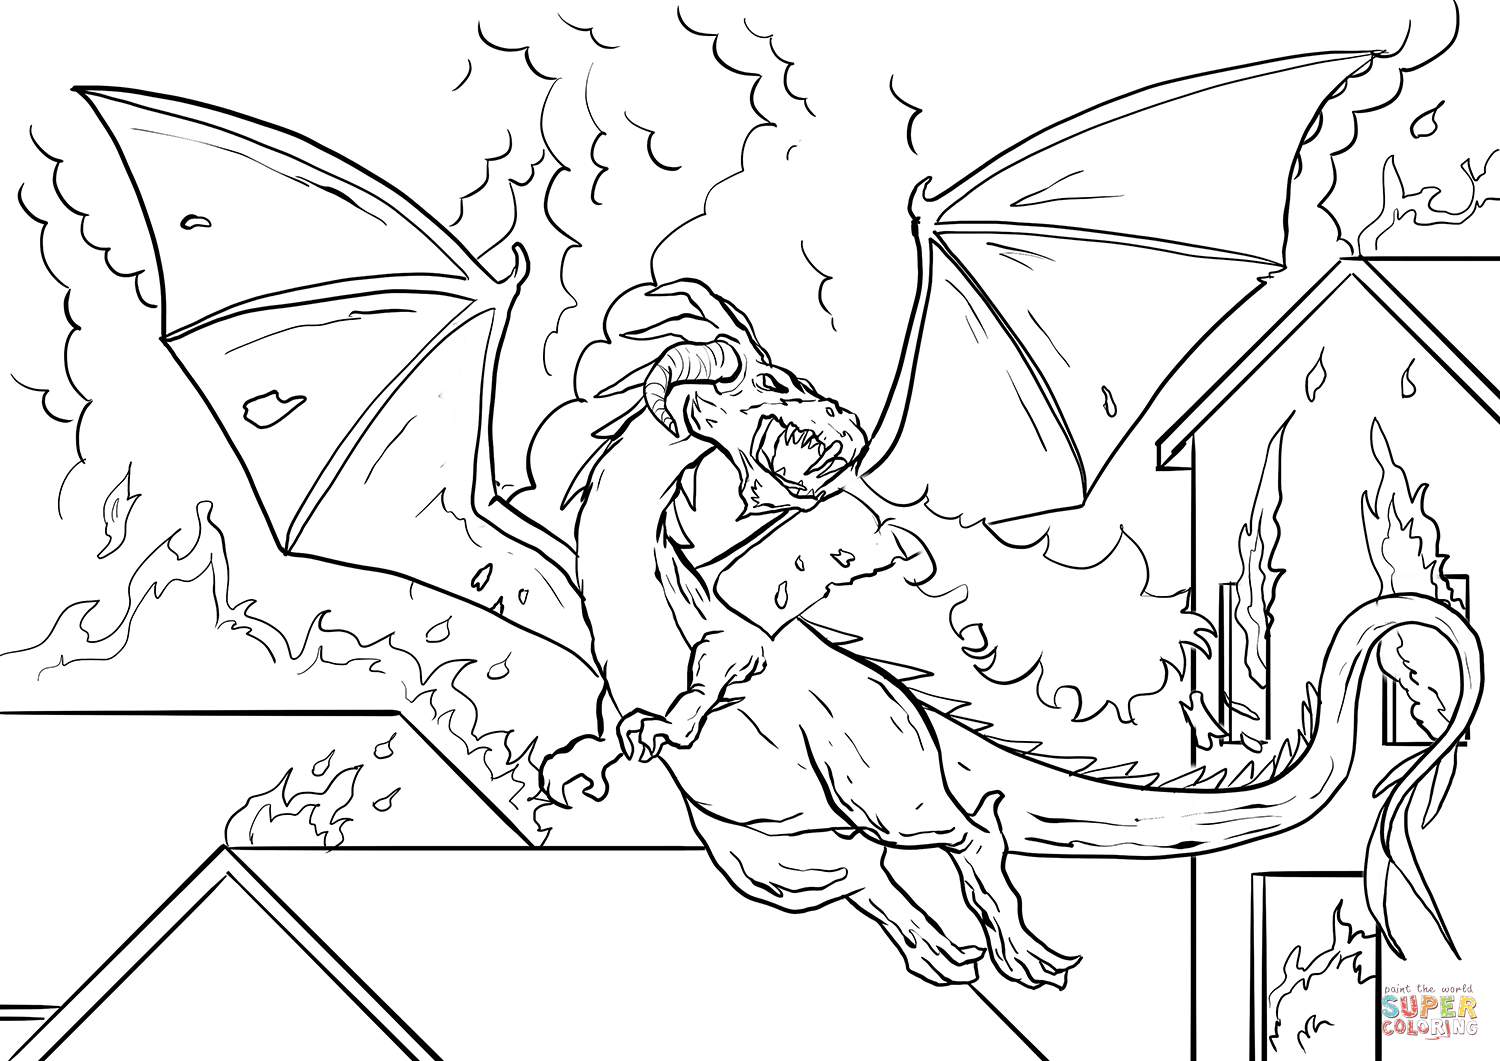 Fire breathing dragon coloring page free printable coloring pages